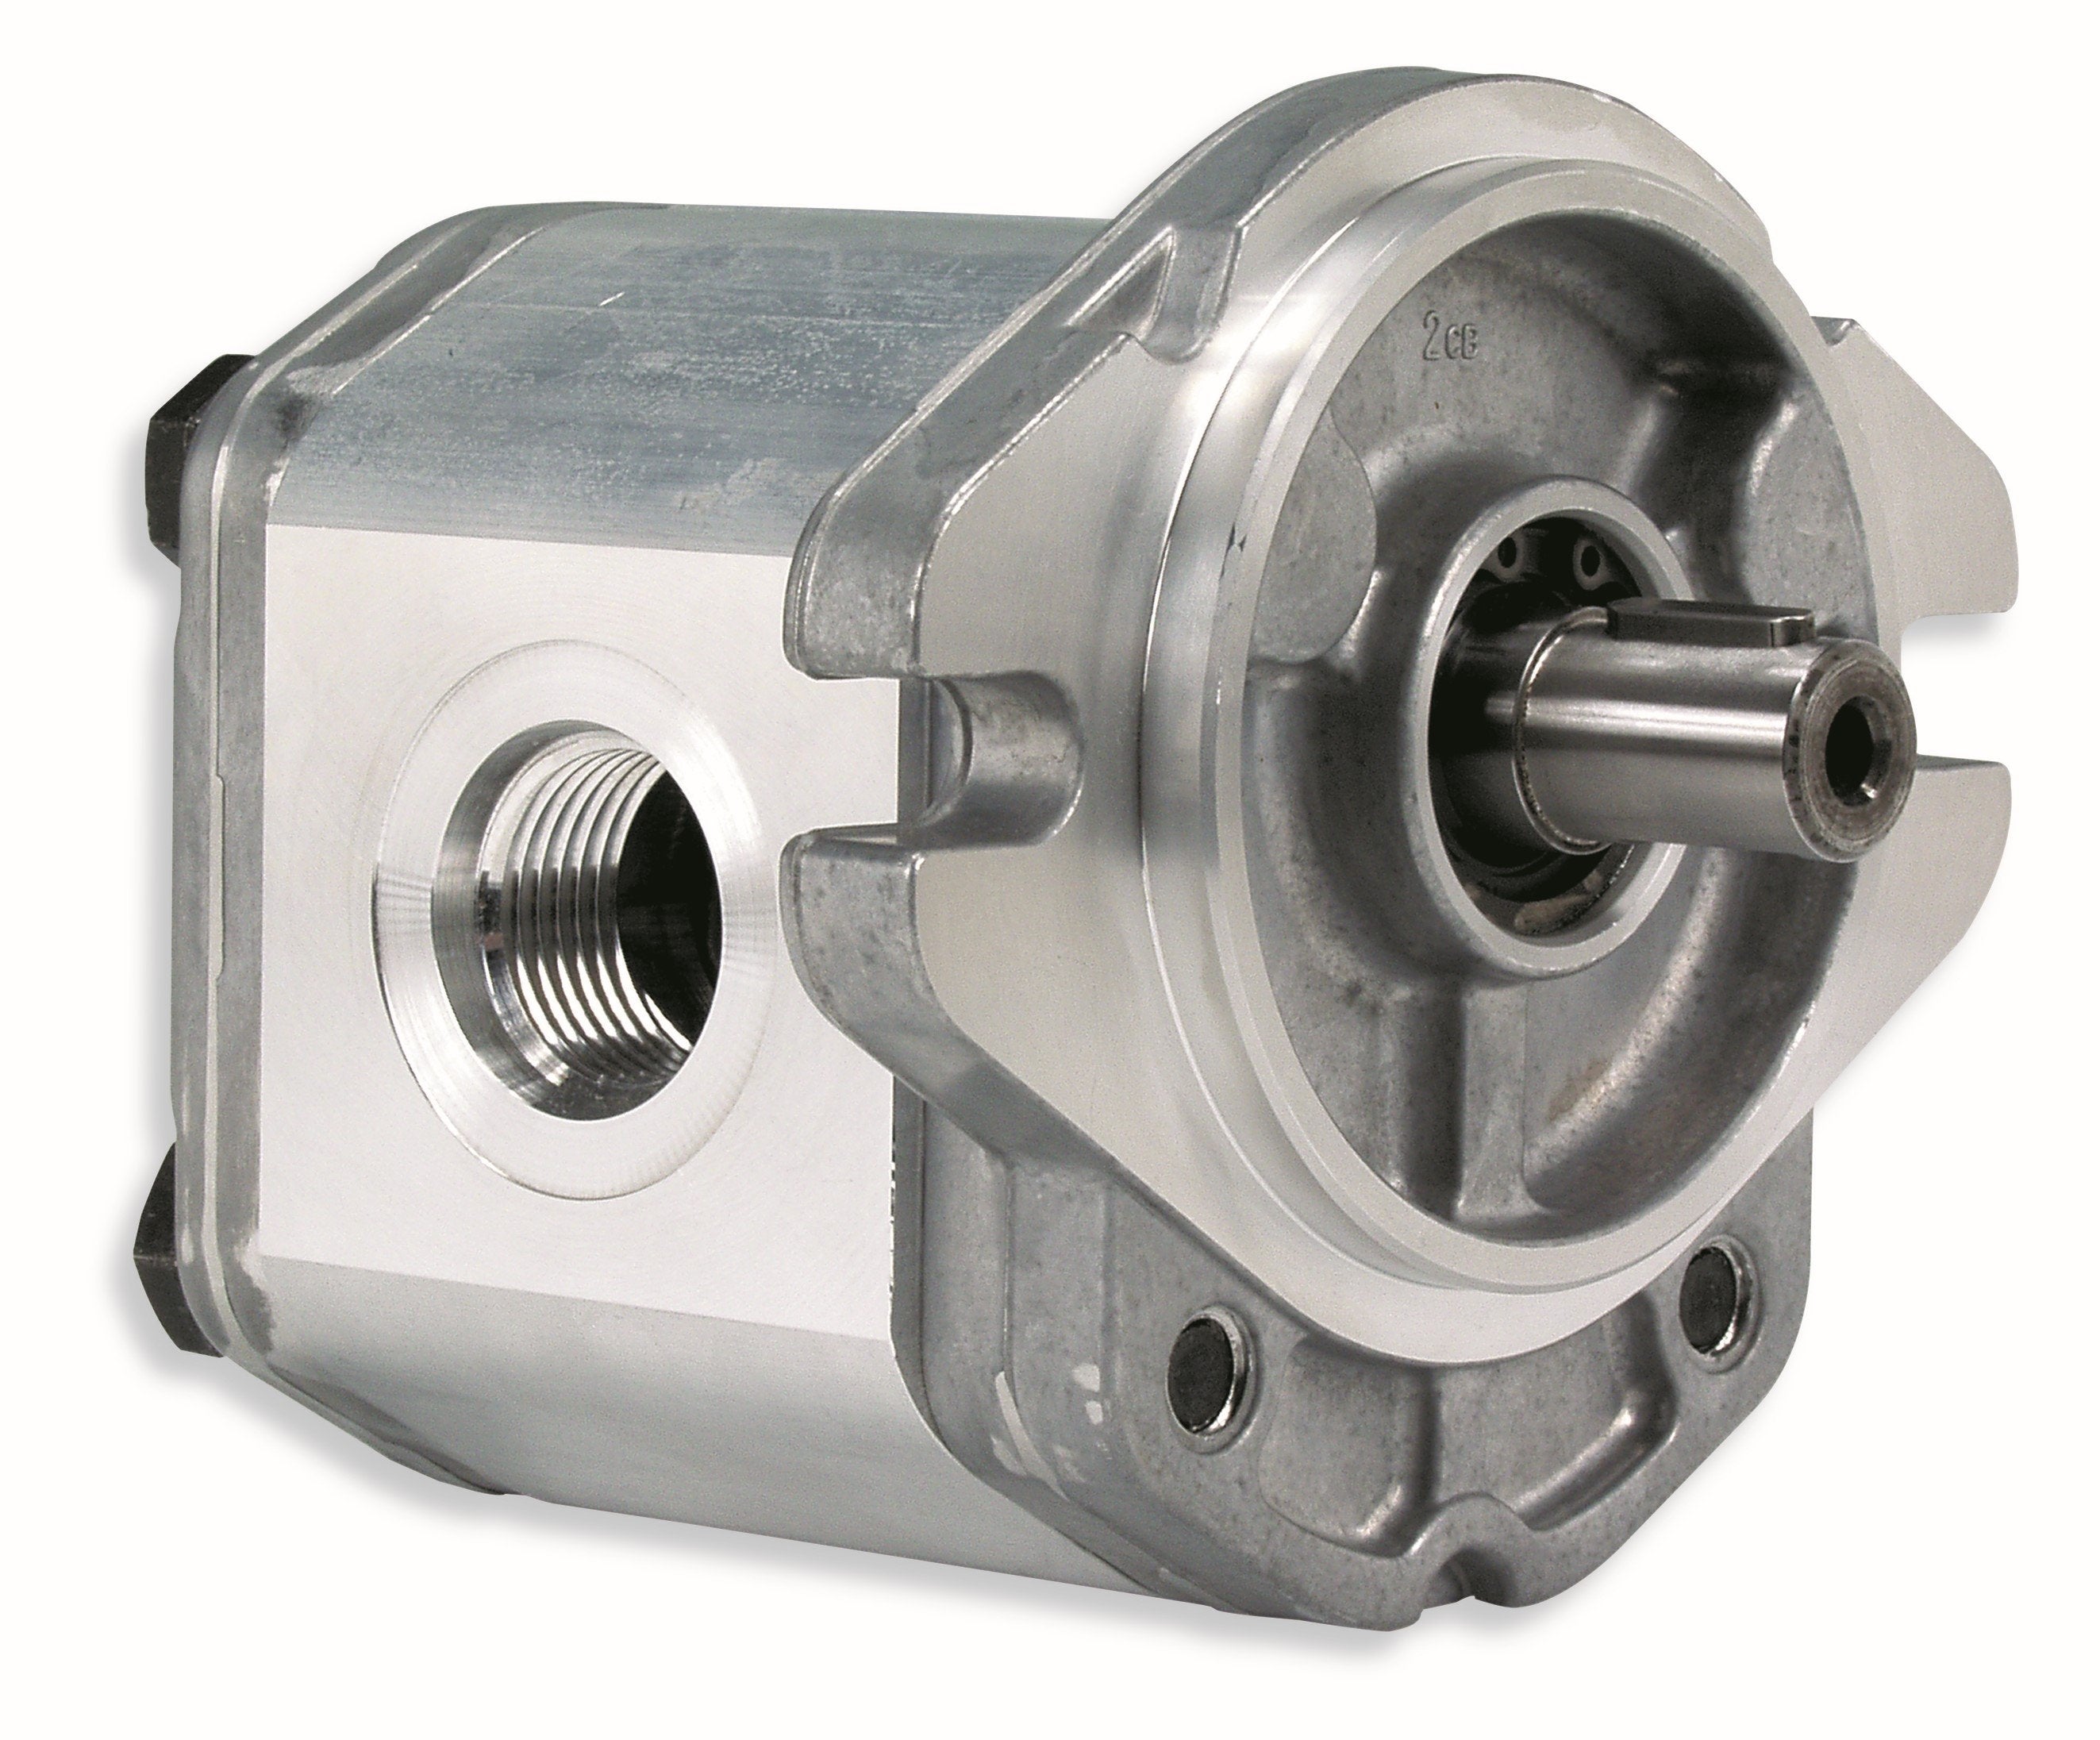 GHM3A-R-33-S1-E4 : Marzocchi Gear Motor, Bidirectional, 22cc, 4060psi rated, 3500RPM, 1" Code 61 ports, 13T 16/32DP Splined Shaft